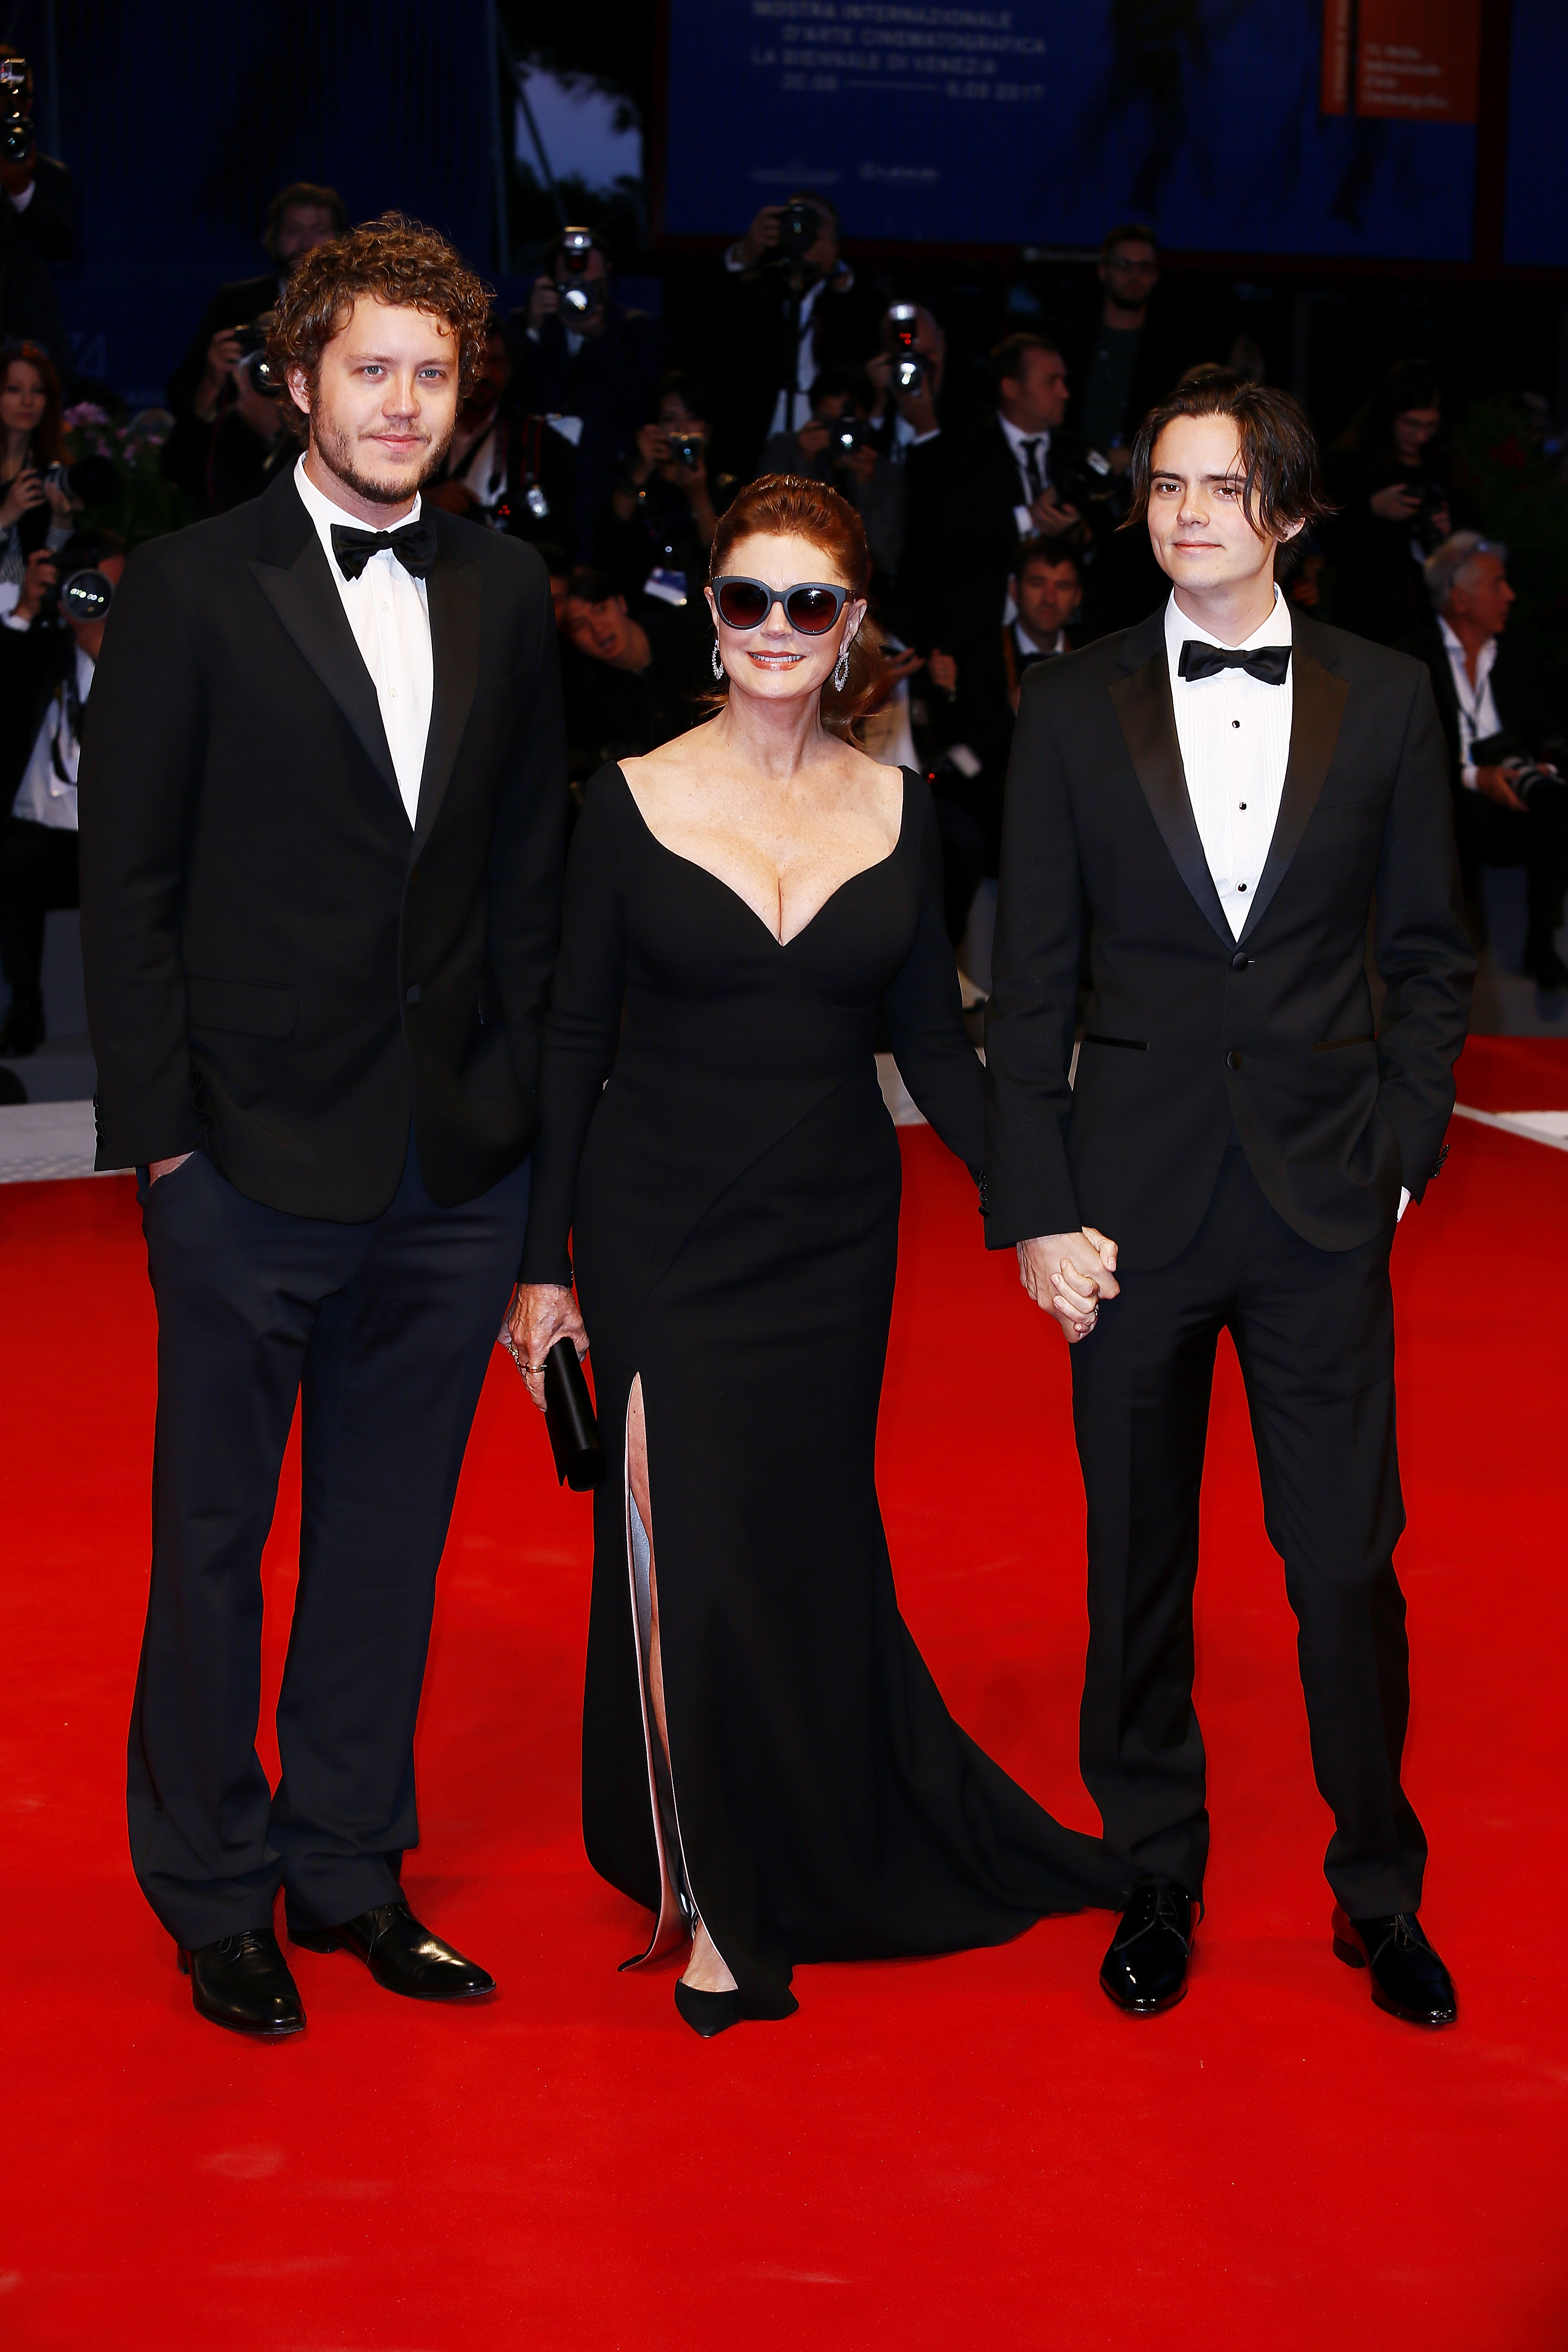 Susan Sarandon, Jack Henry Robbins, and Miles Robbins in Venice, Italy on September 3, 2017. | Source: Getty Images